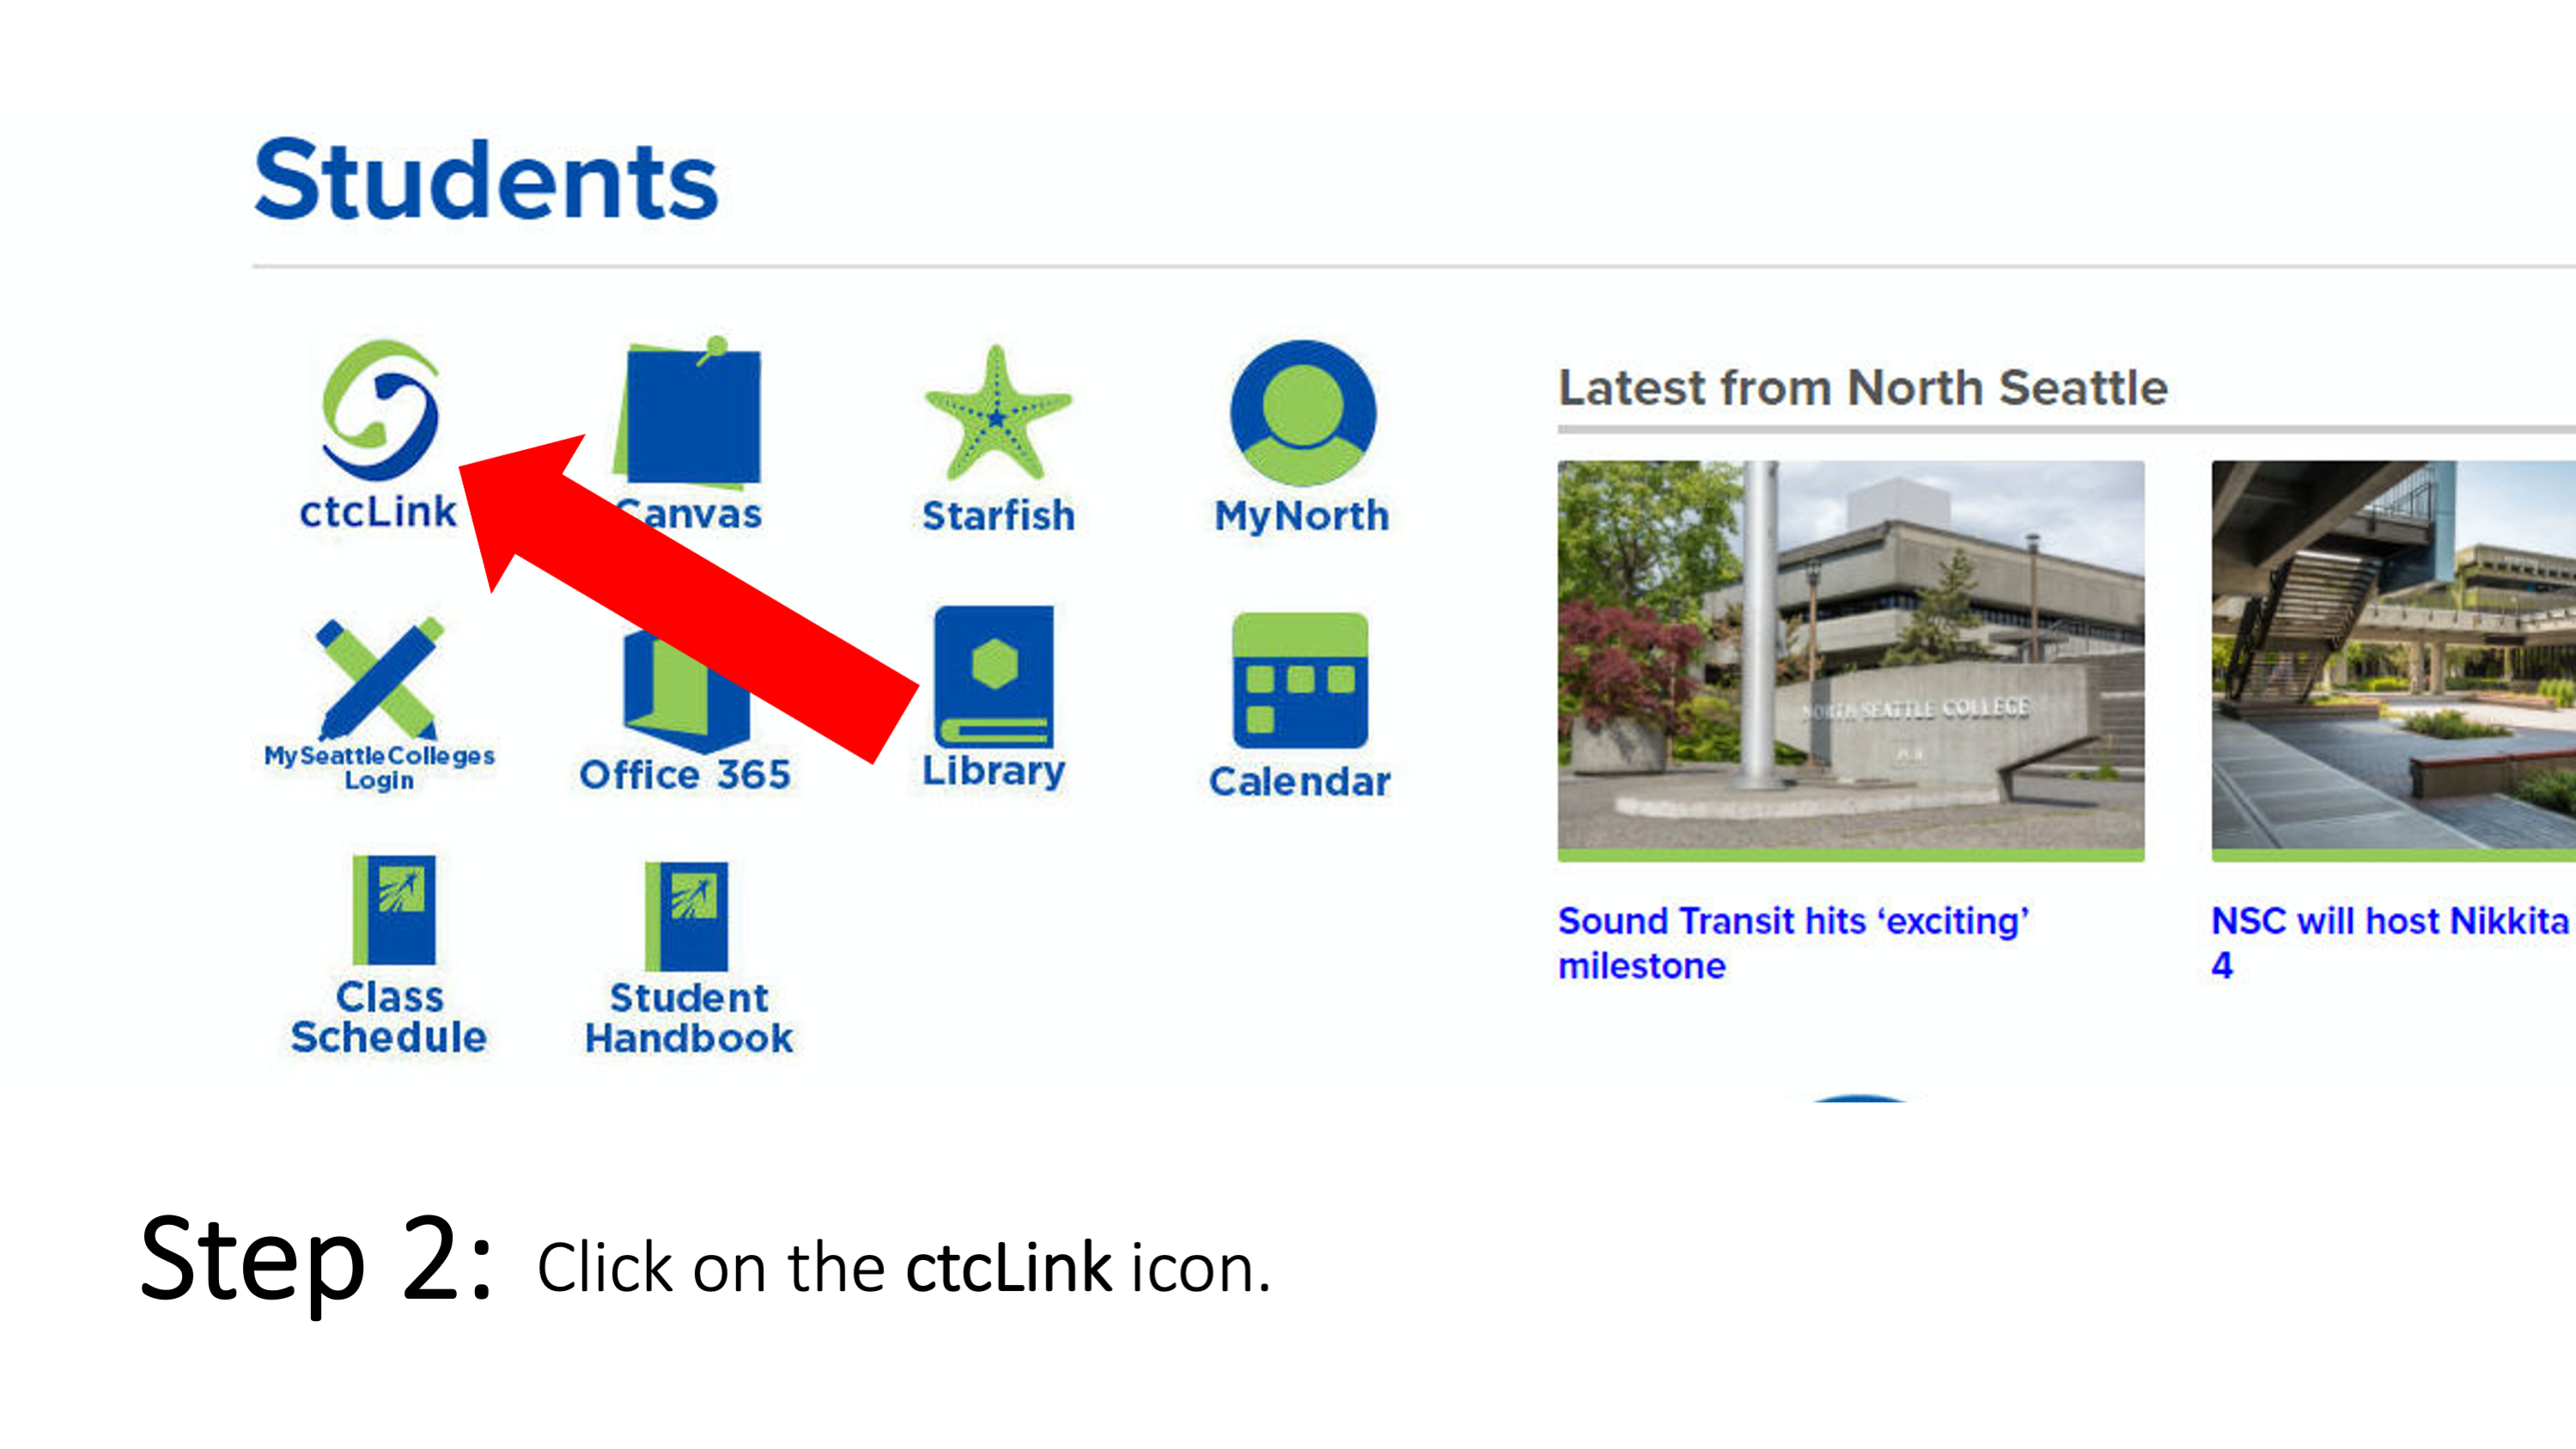 Step 2: Click on the ctcLink icon.